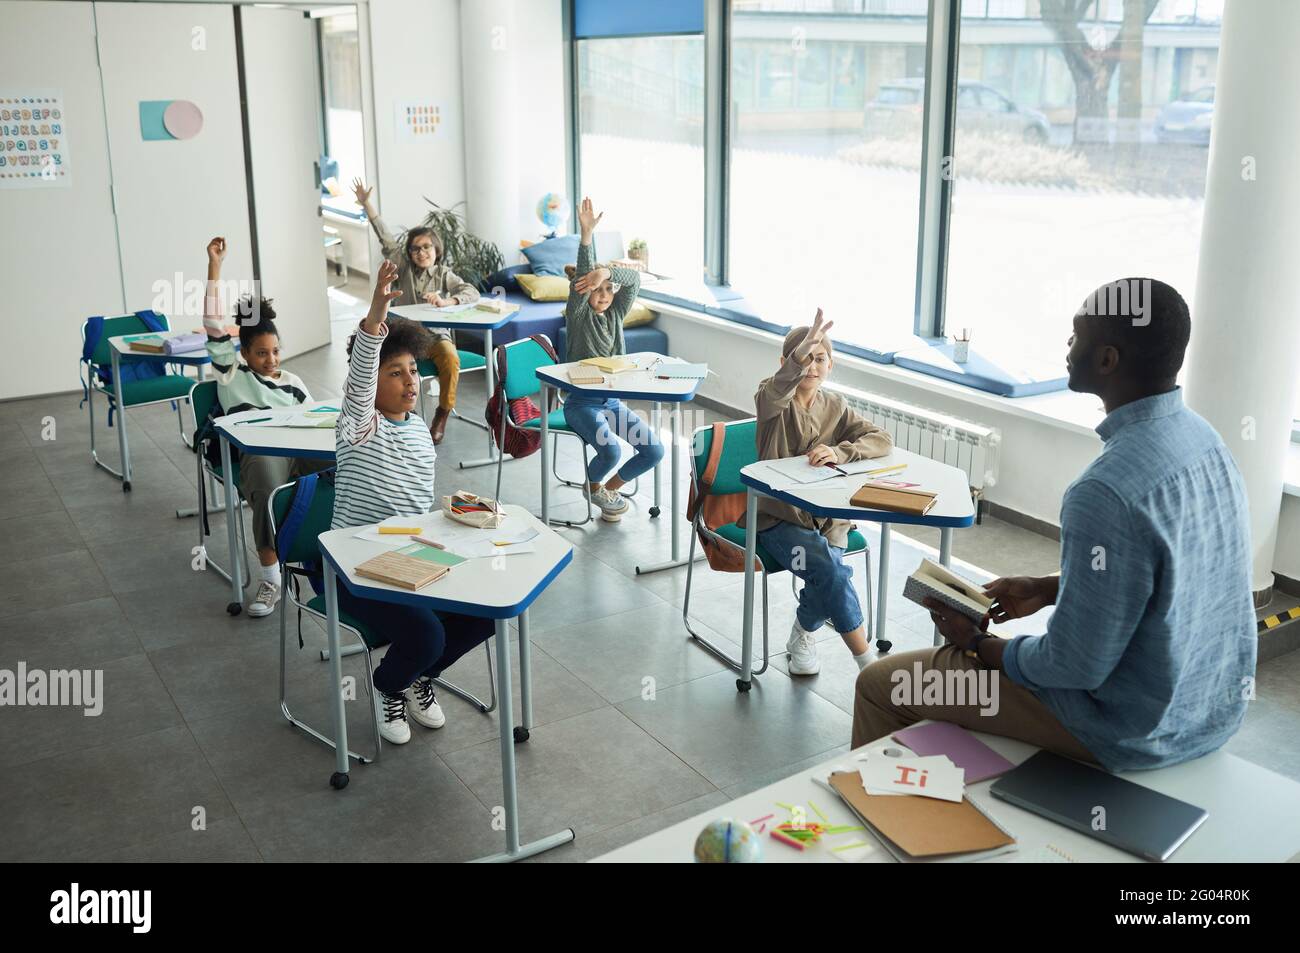 Diverse group of children raising hands in school classroom while sitting at desks, copy space Stock Photo